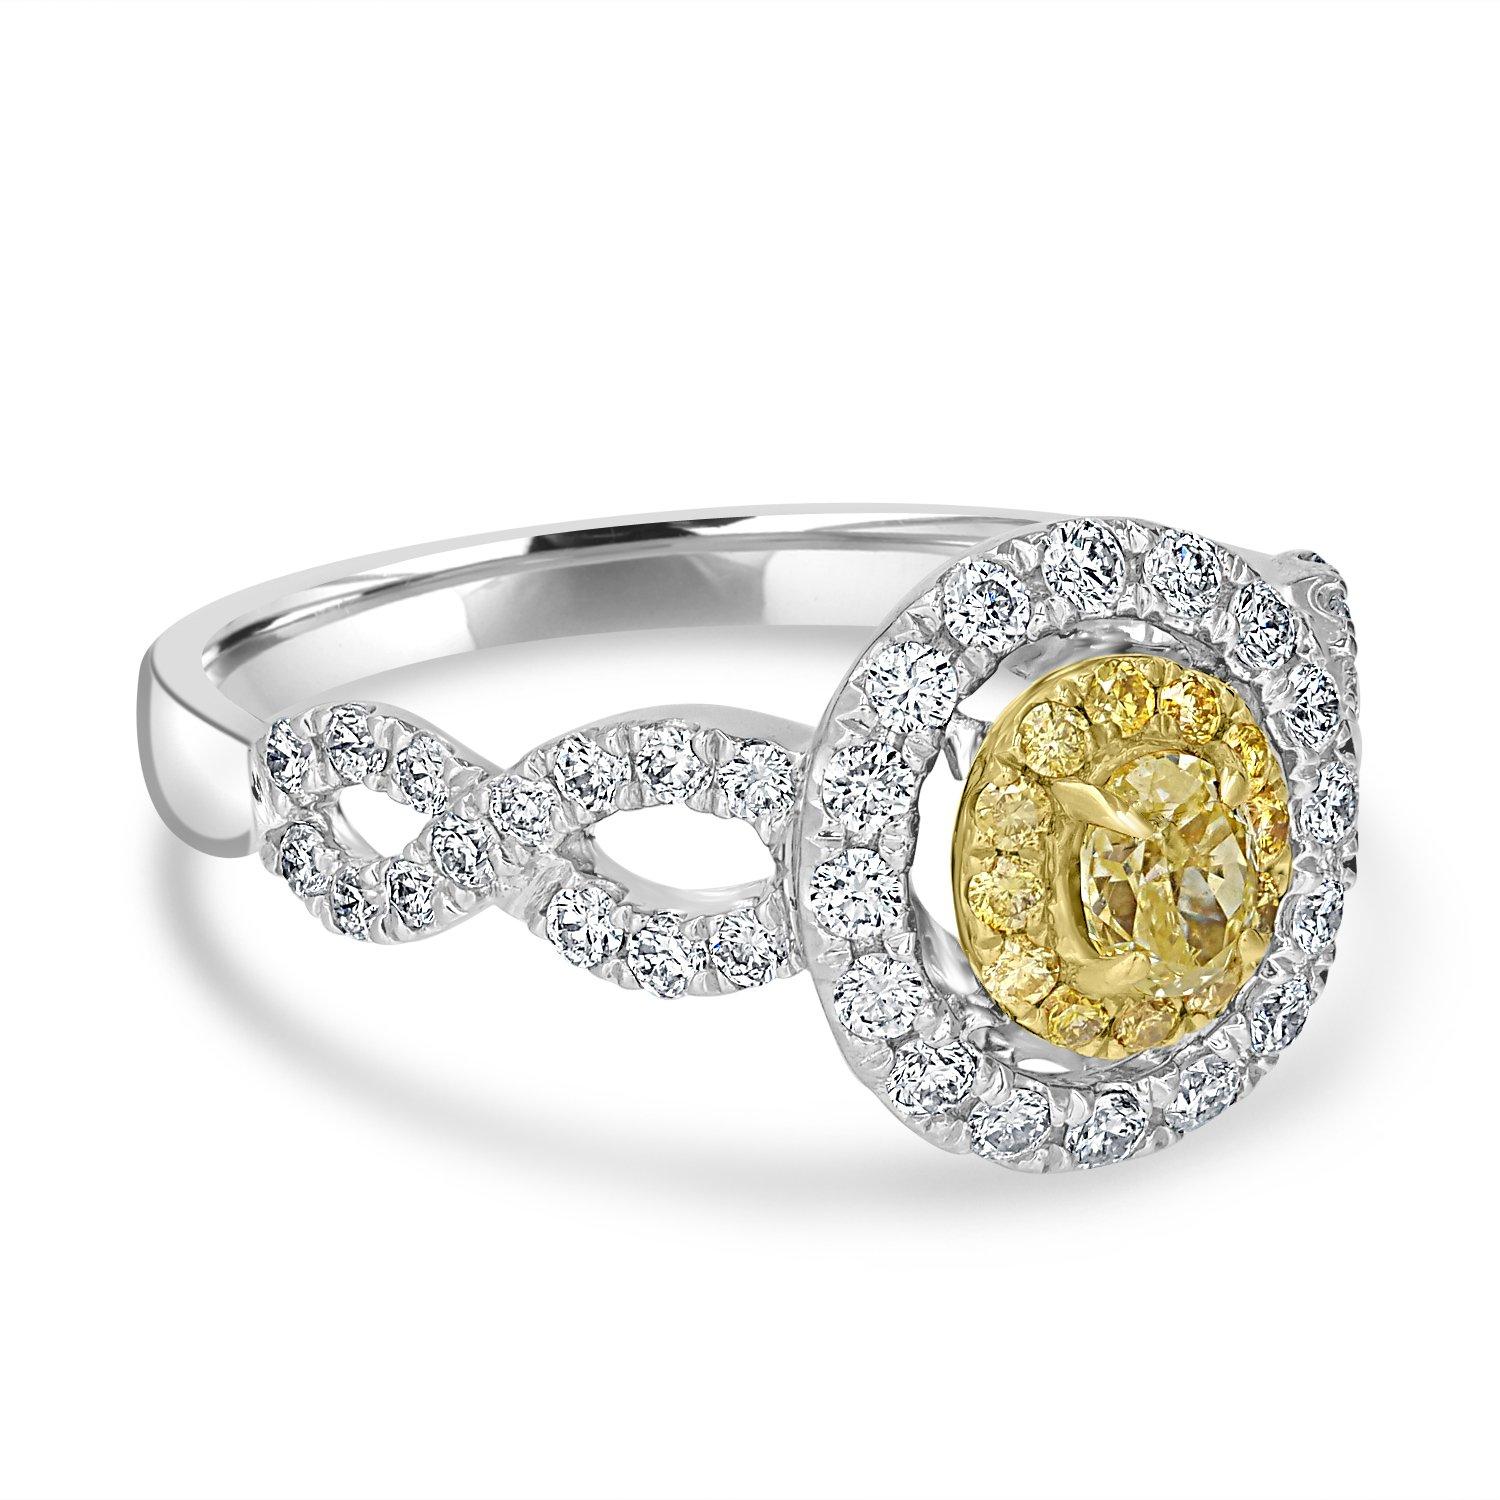 0.23ct Yellow Diamond Ring with 0.58tct Diamond Set in 18KW & 22KY Two Tone Gold In New Condition For Sale In New York, NY